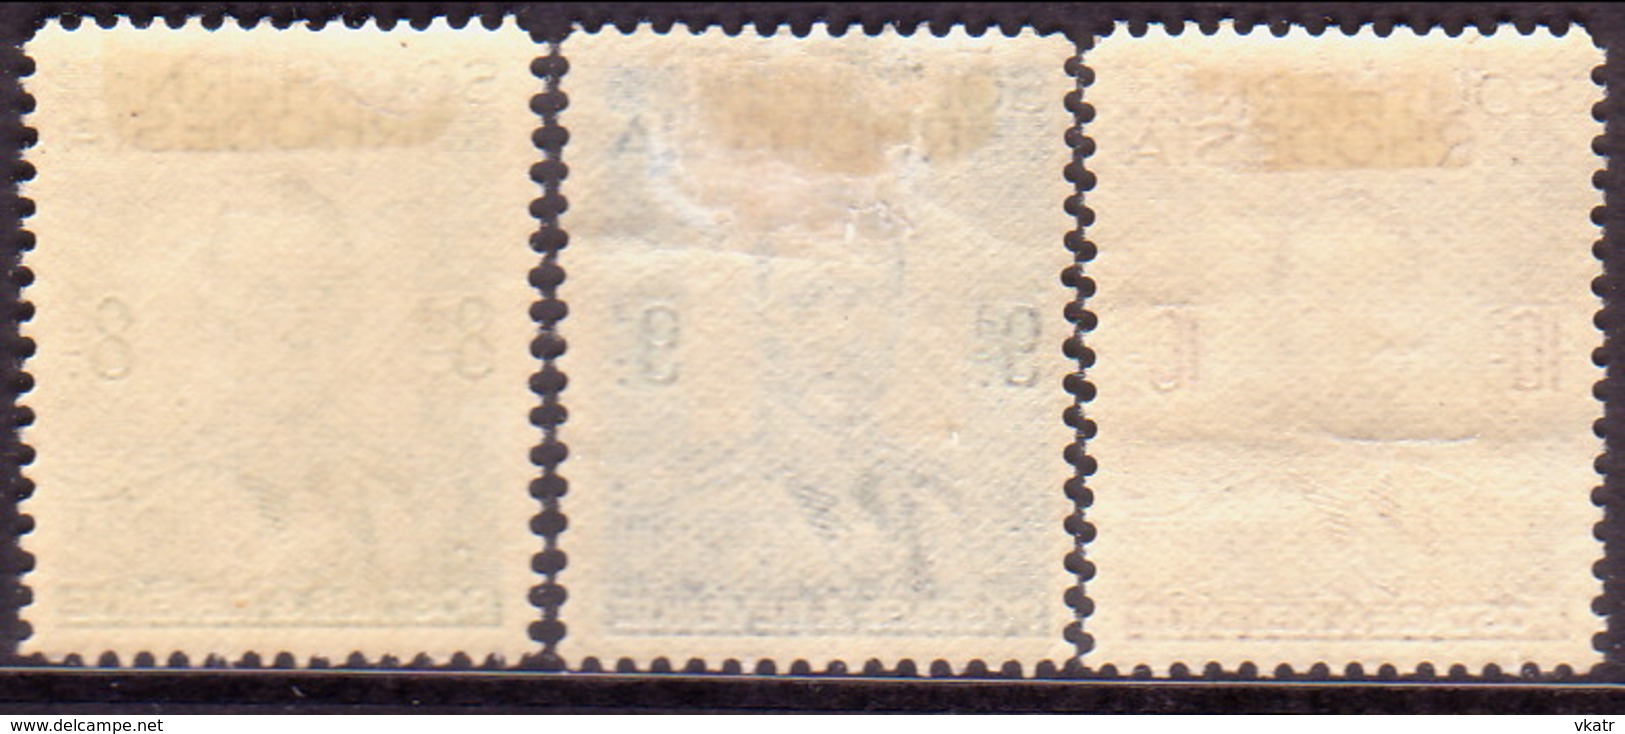 SOUTHERN RHODESIA 1937 SG 45,46,47 Part Set MH 3 Stamps Of 13 - Zuid-Rhodesië (...-1964)